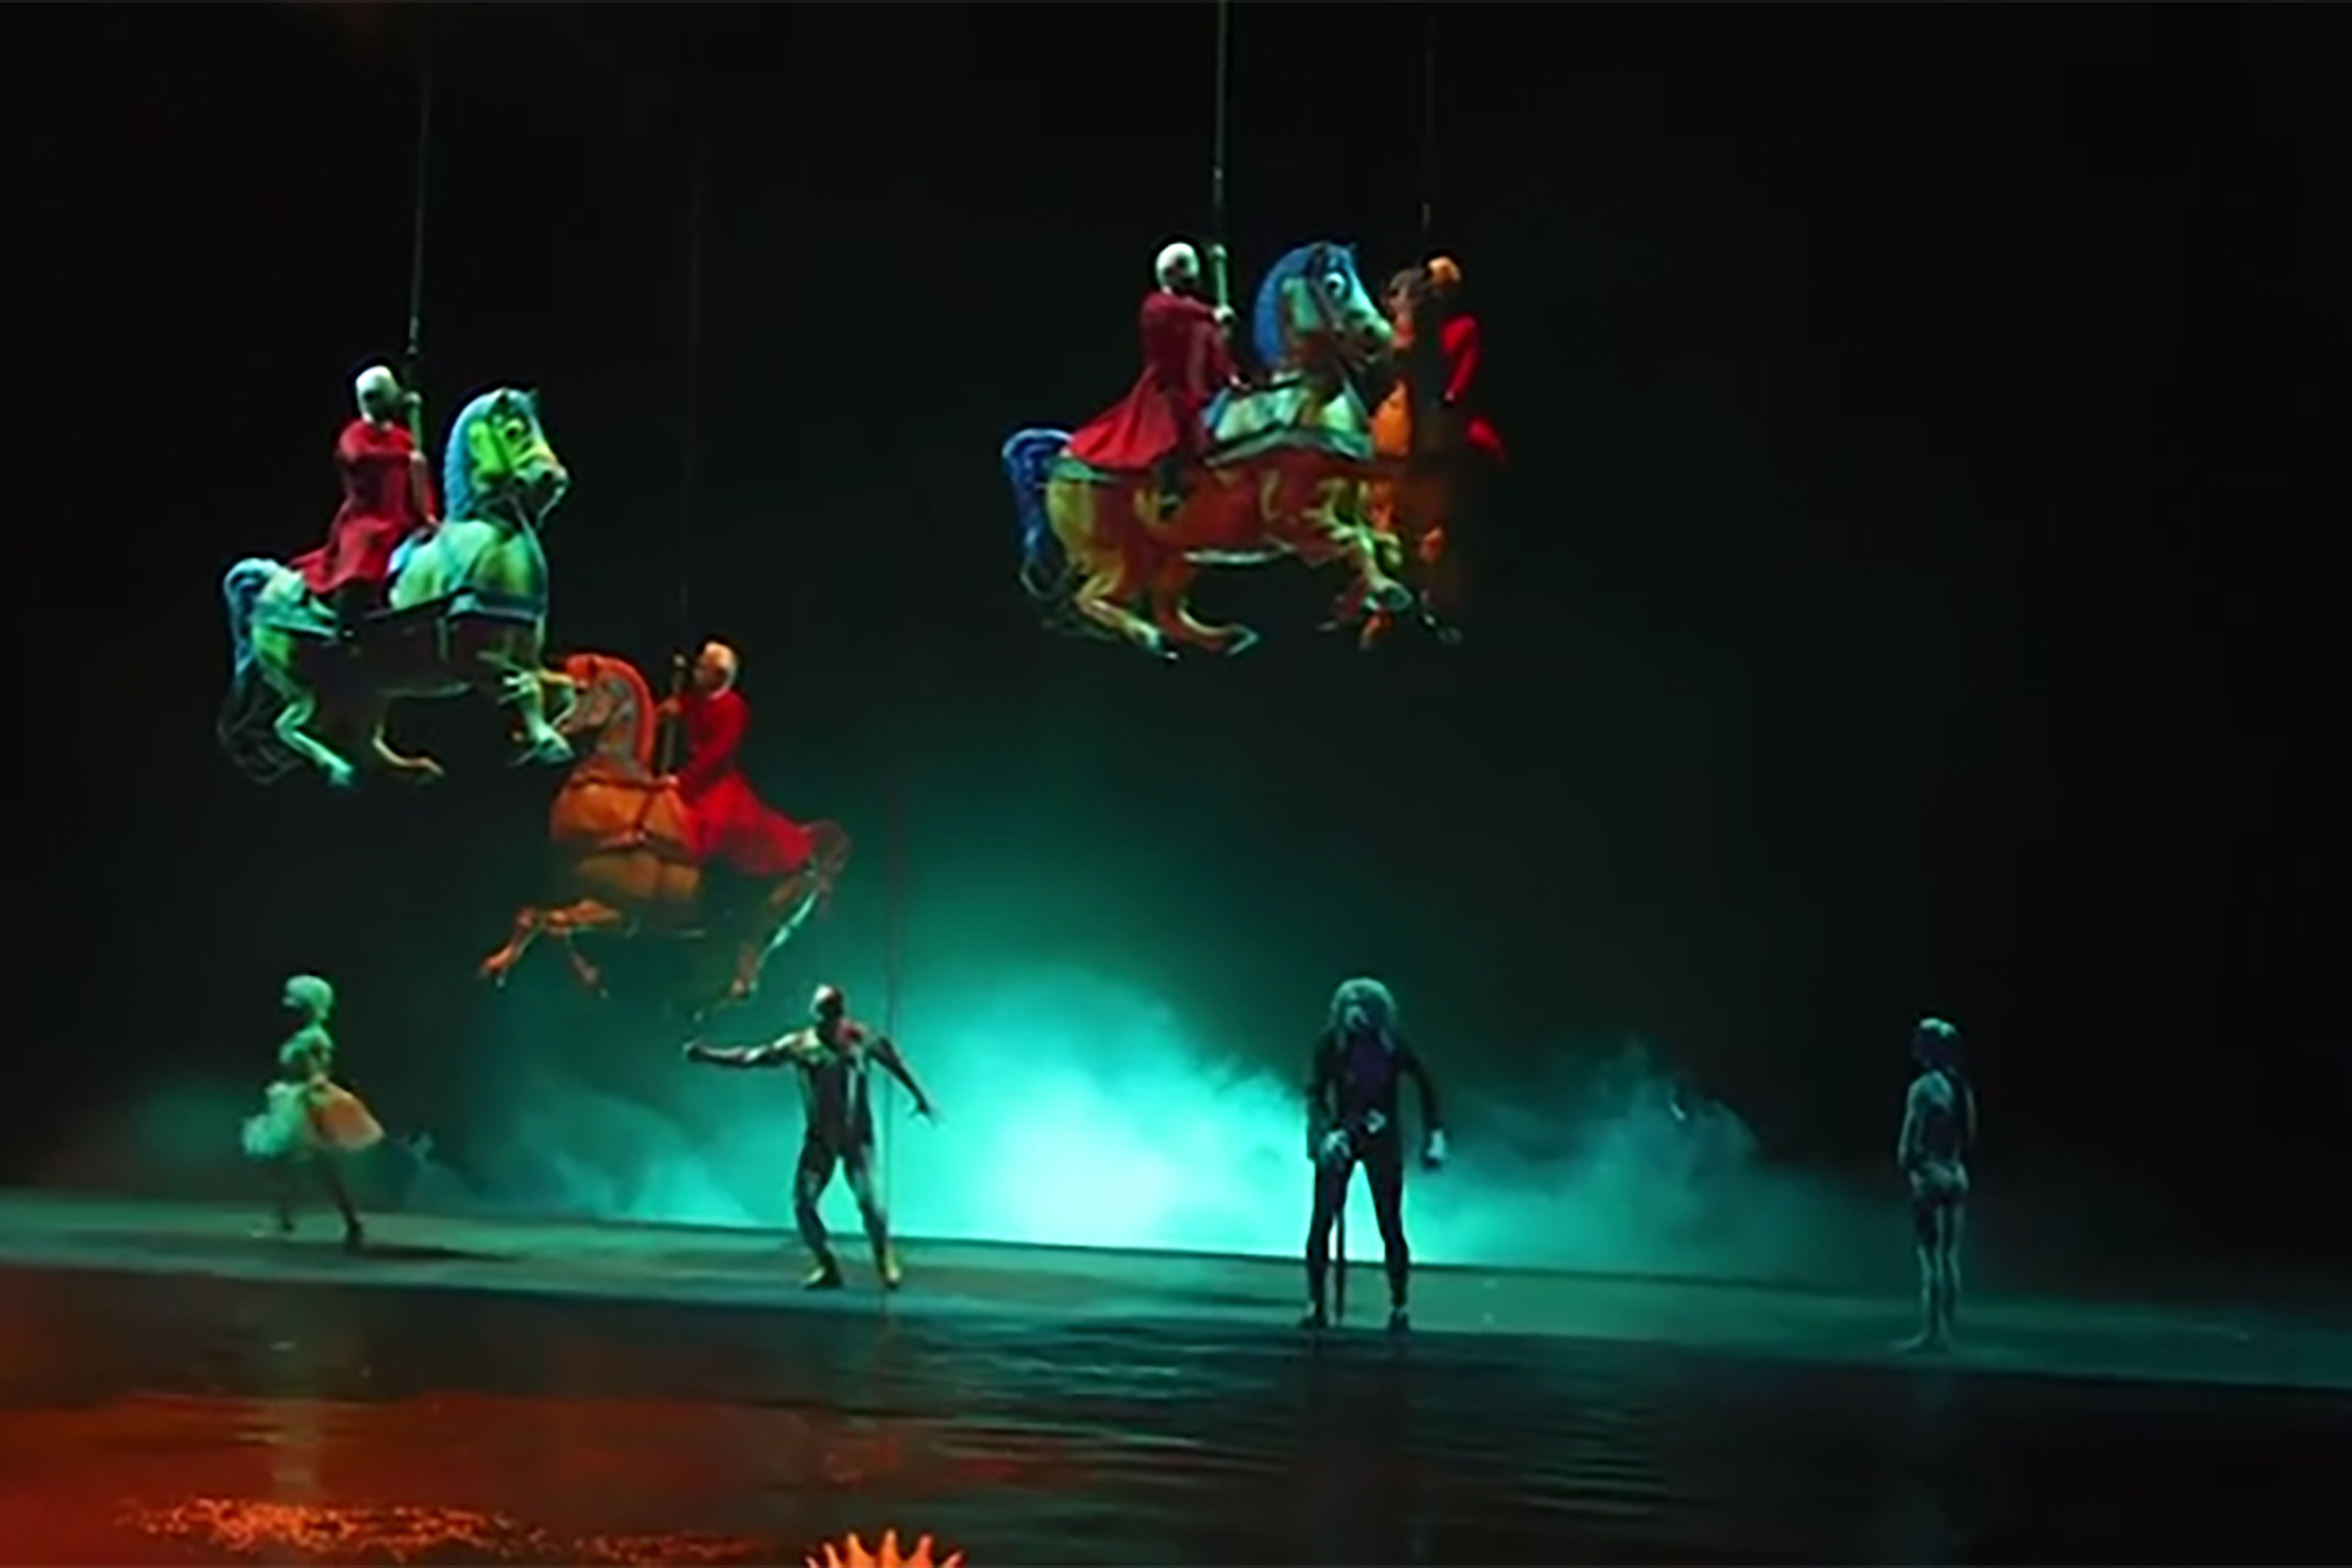 “O” by Cirque du Soleil, which has been enjoyed by more than 17 million people, celebrates its first performance in 16 months at Bellagio before a sold-out crowd on July 1, 2021.